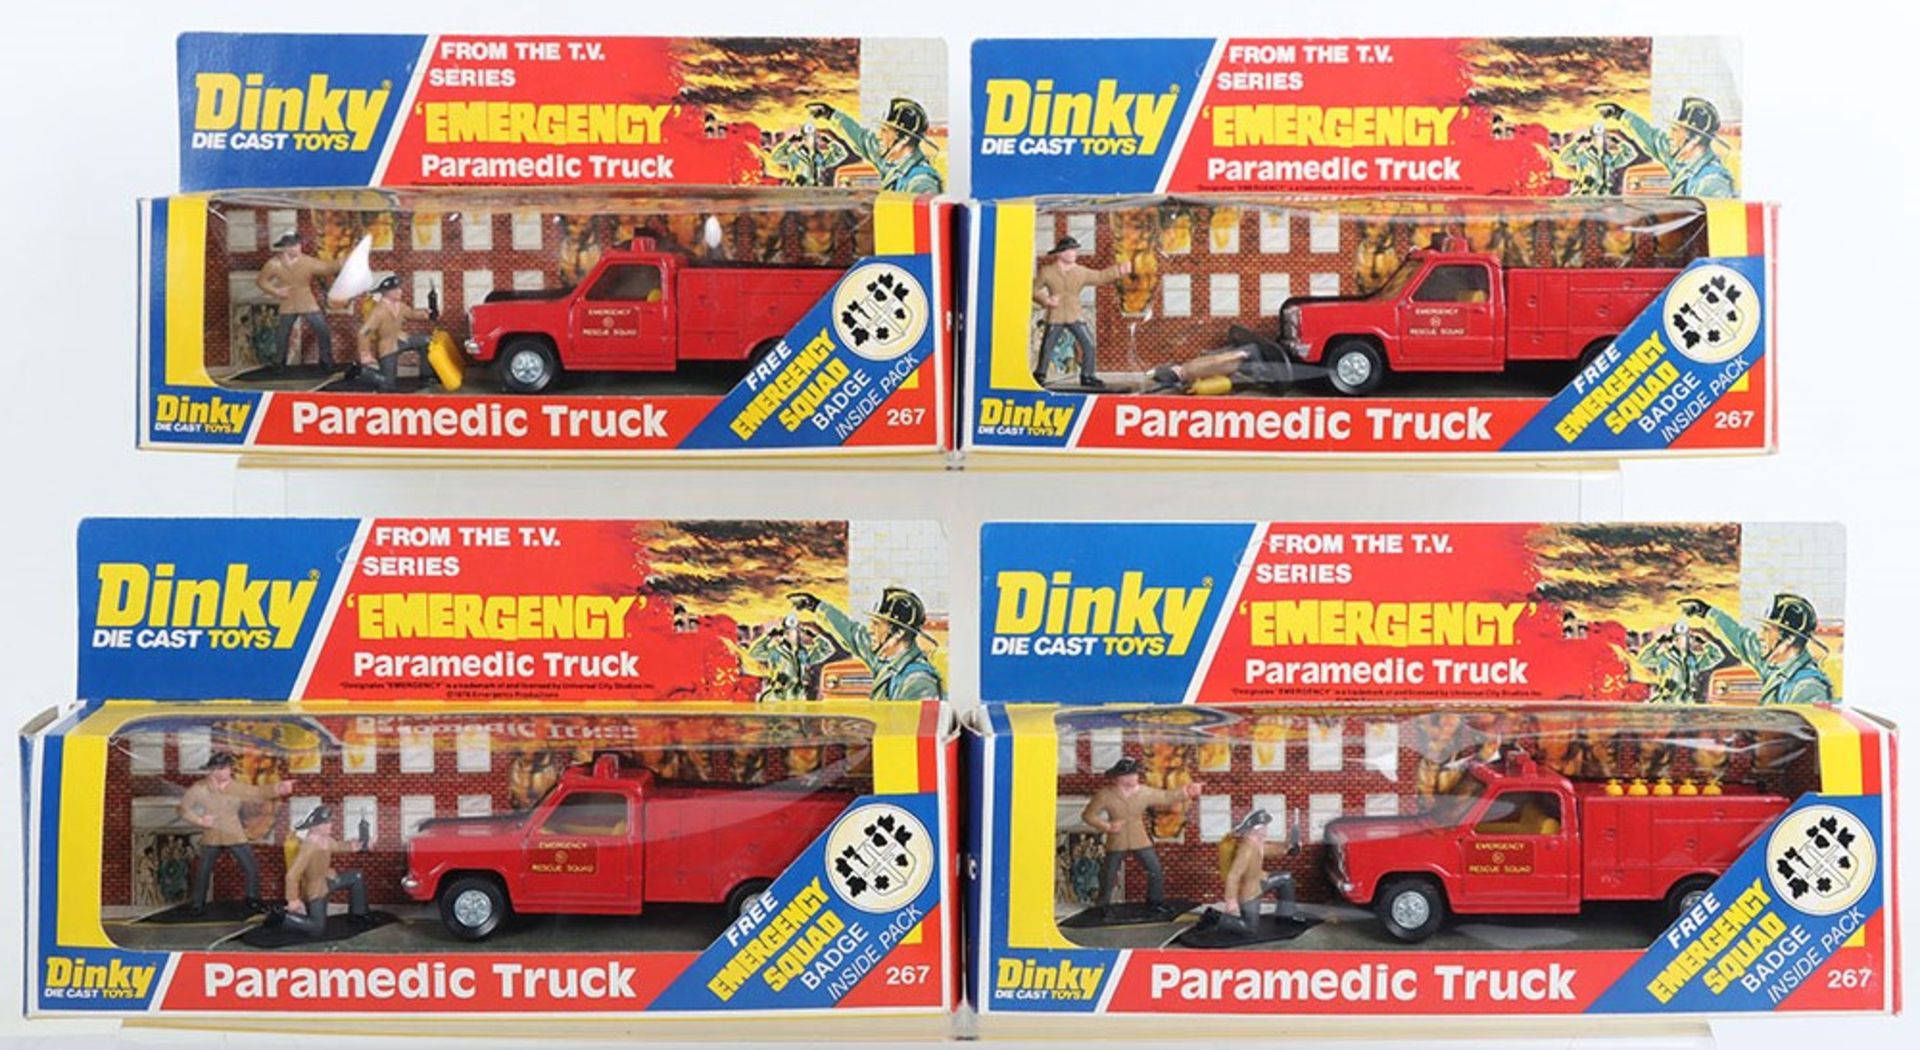 Four Dinky 267 From The T.V. Series ‘Emergency’ Paramedic Trucks